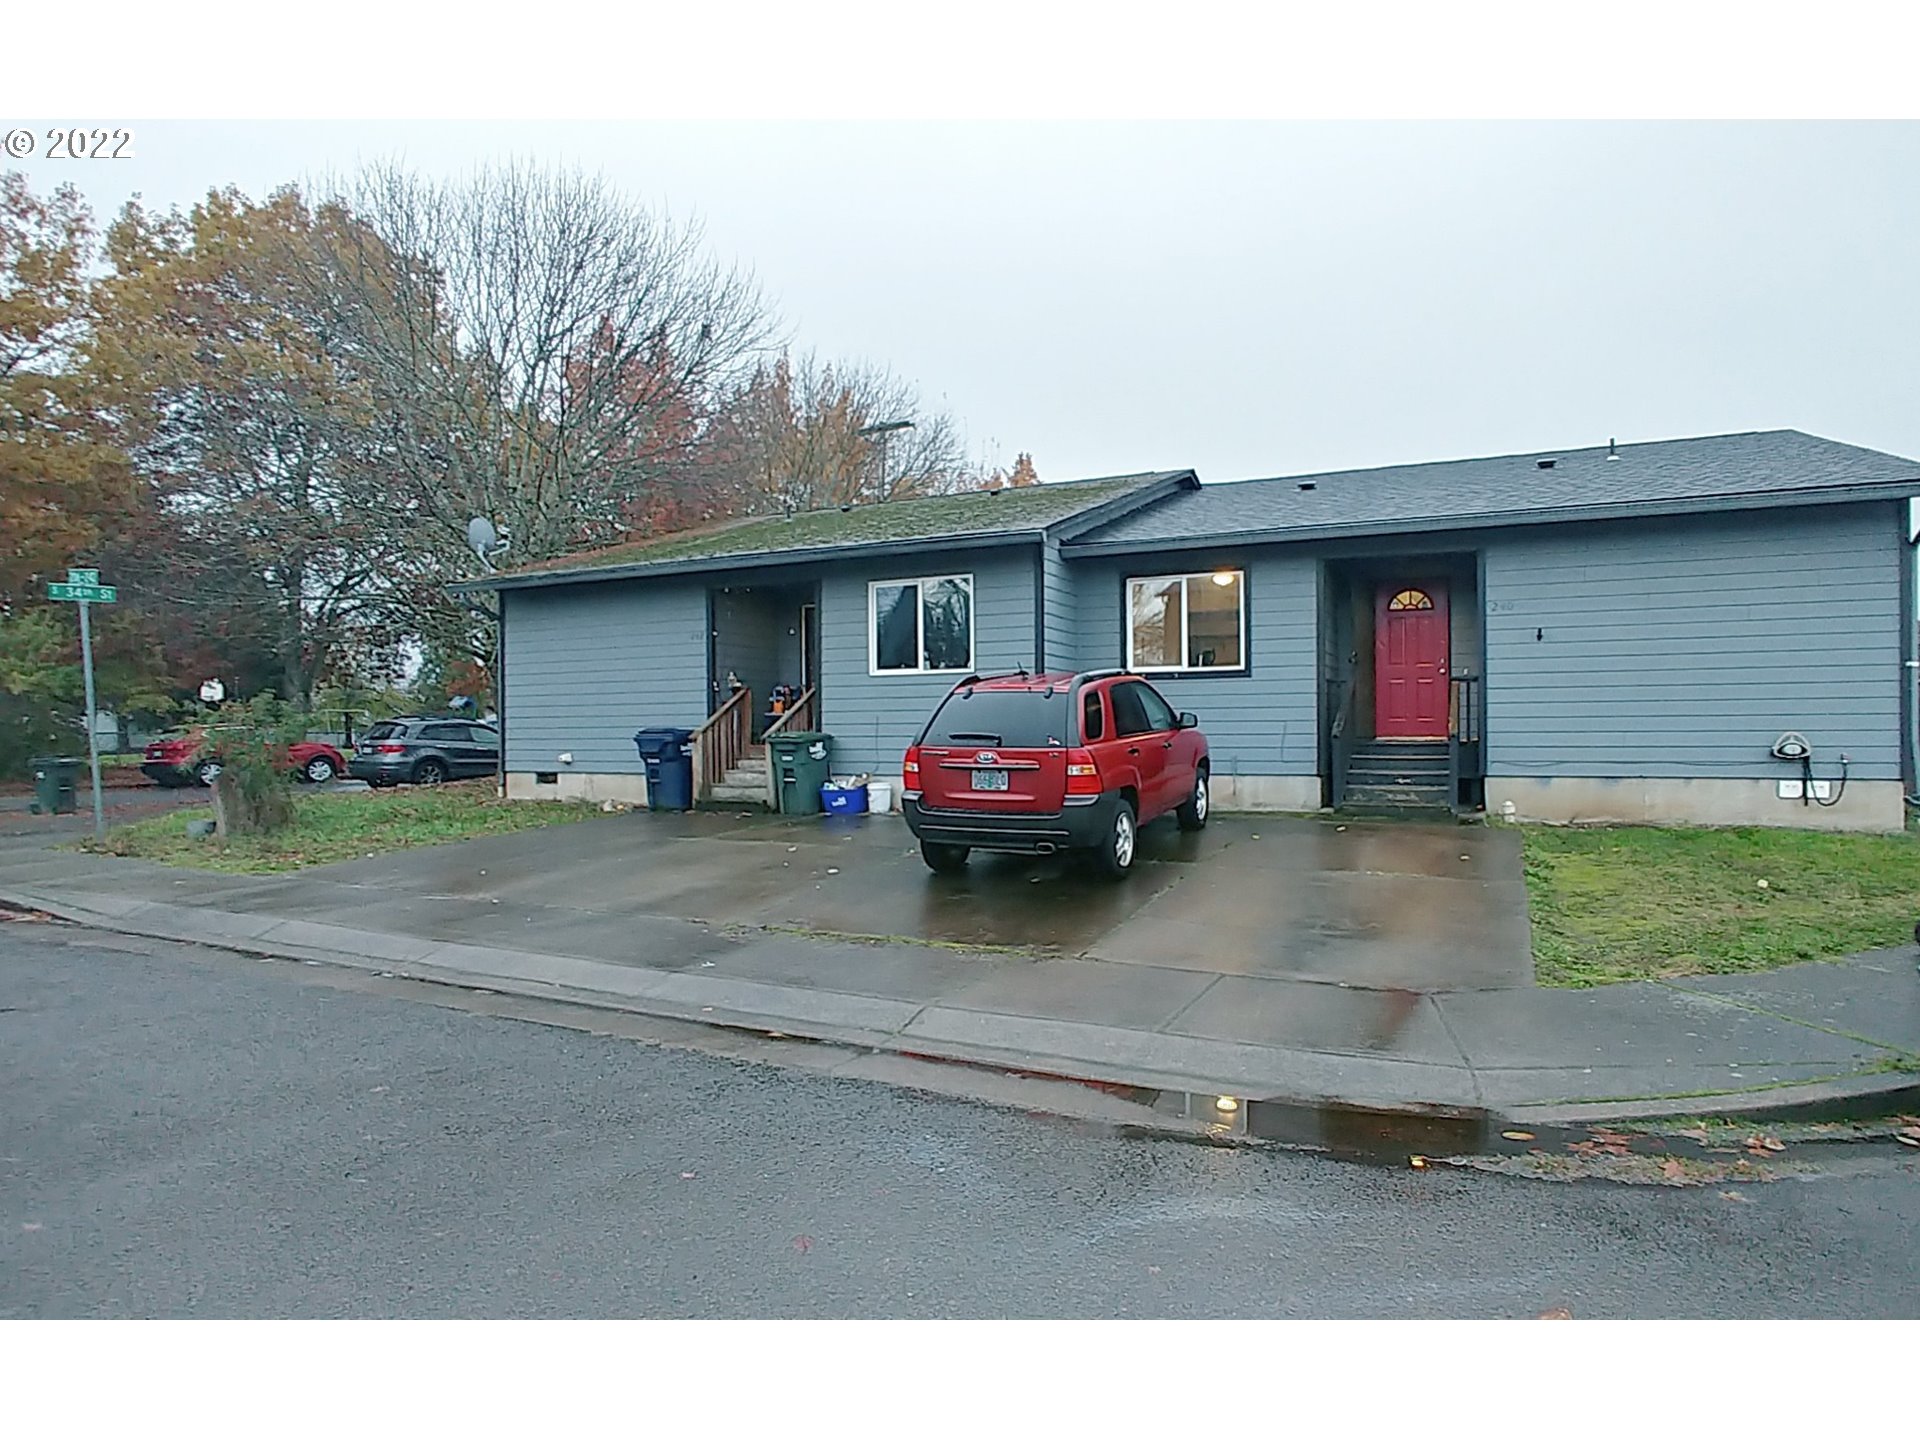 240 S 34TH ST, Springfield, OR 97478